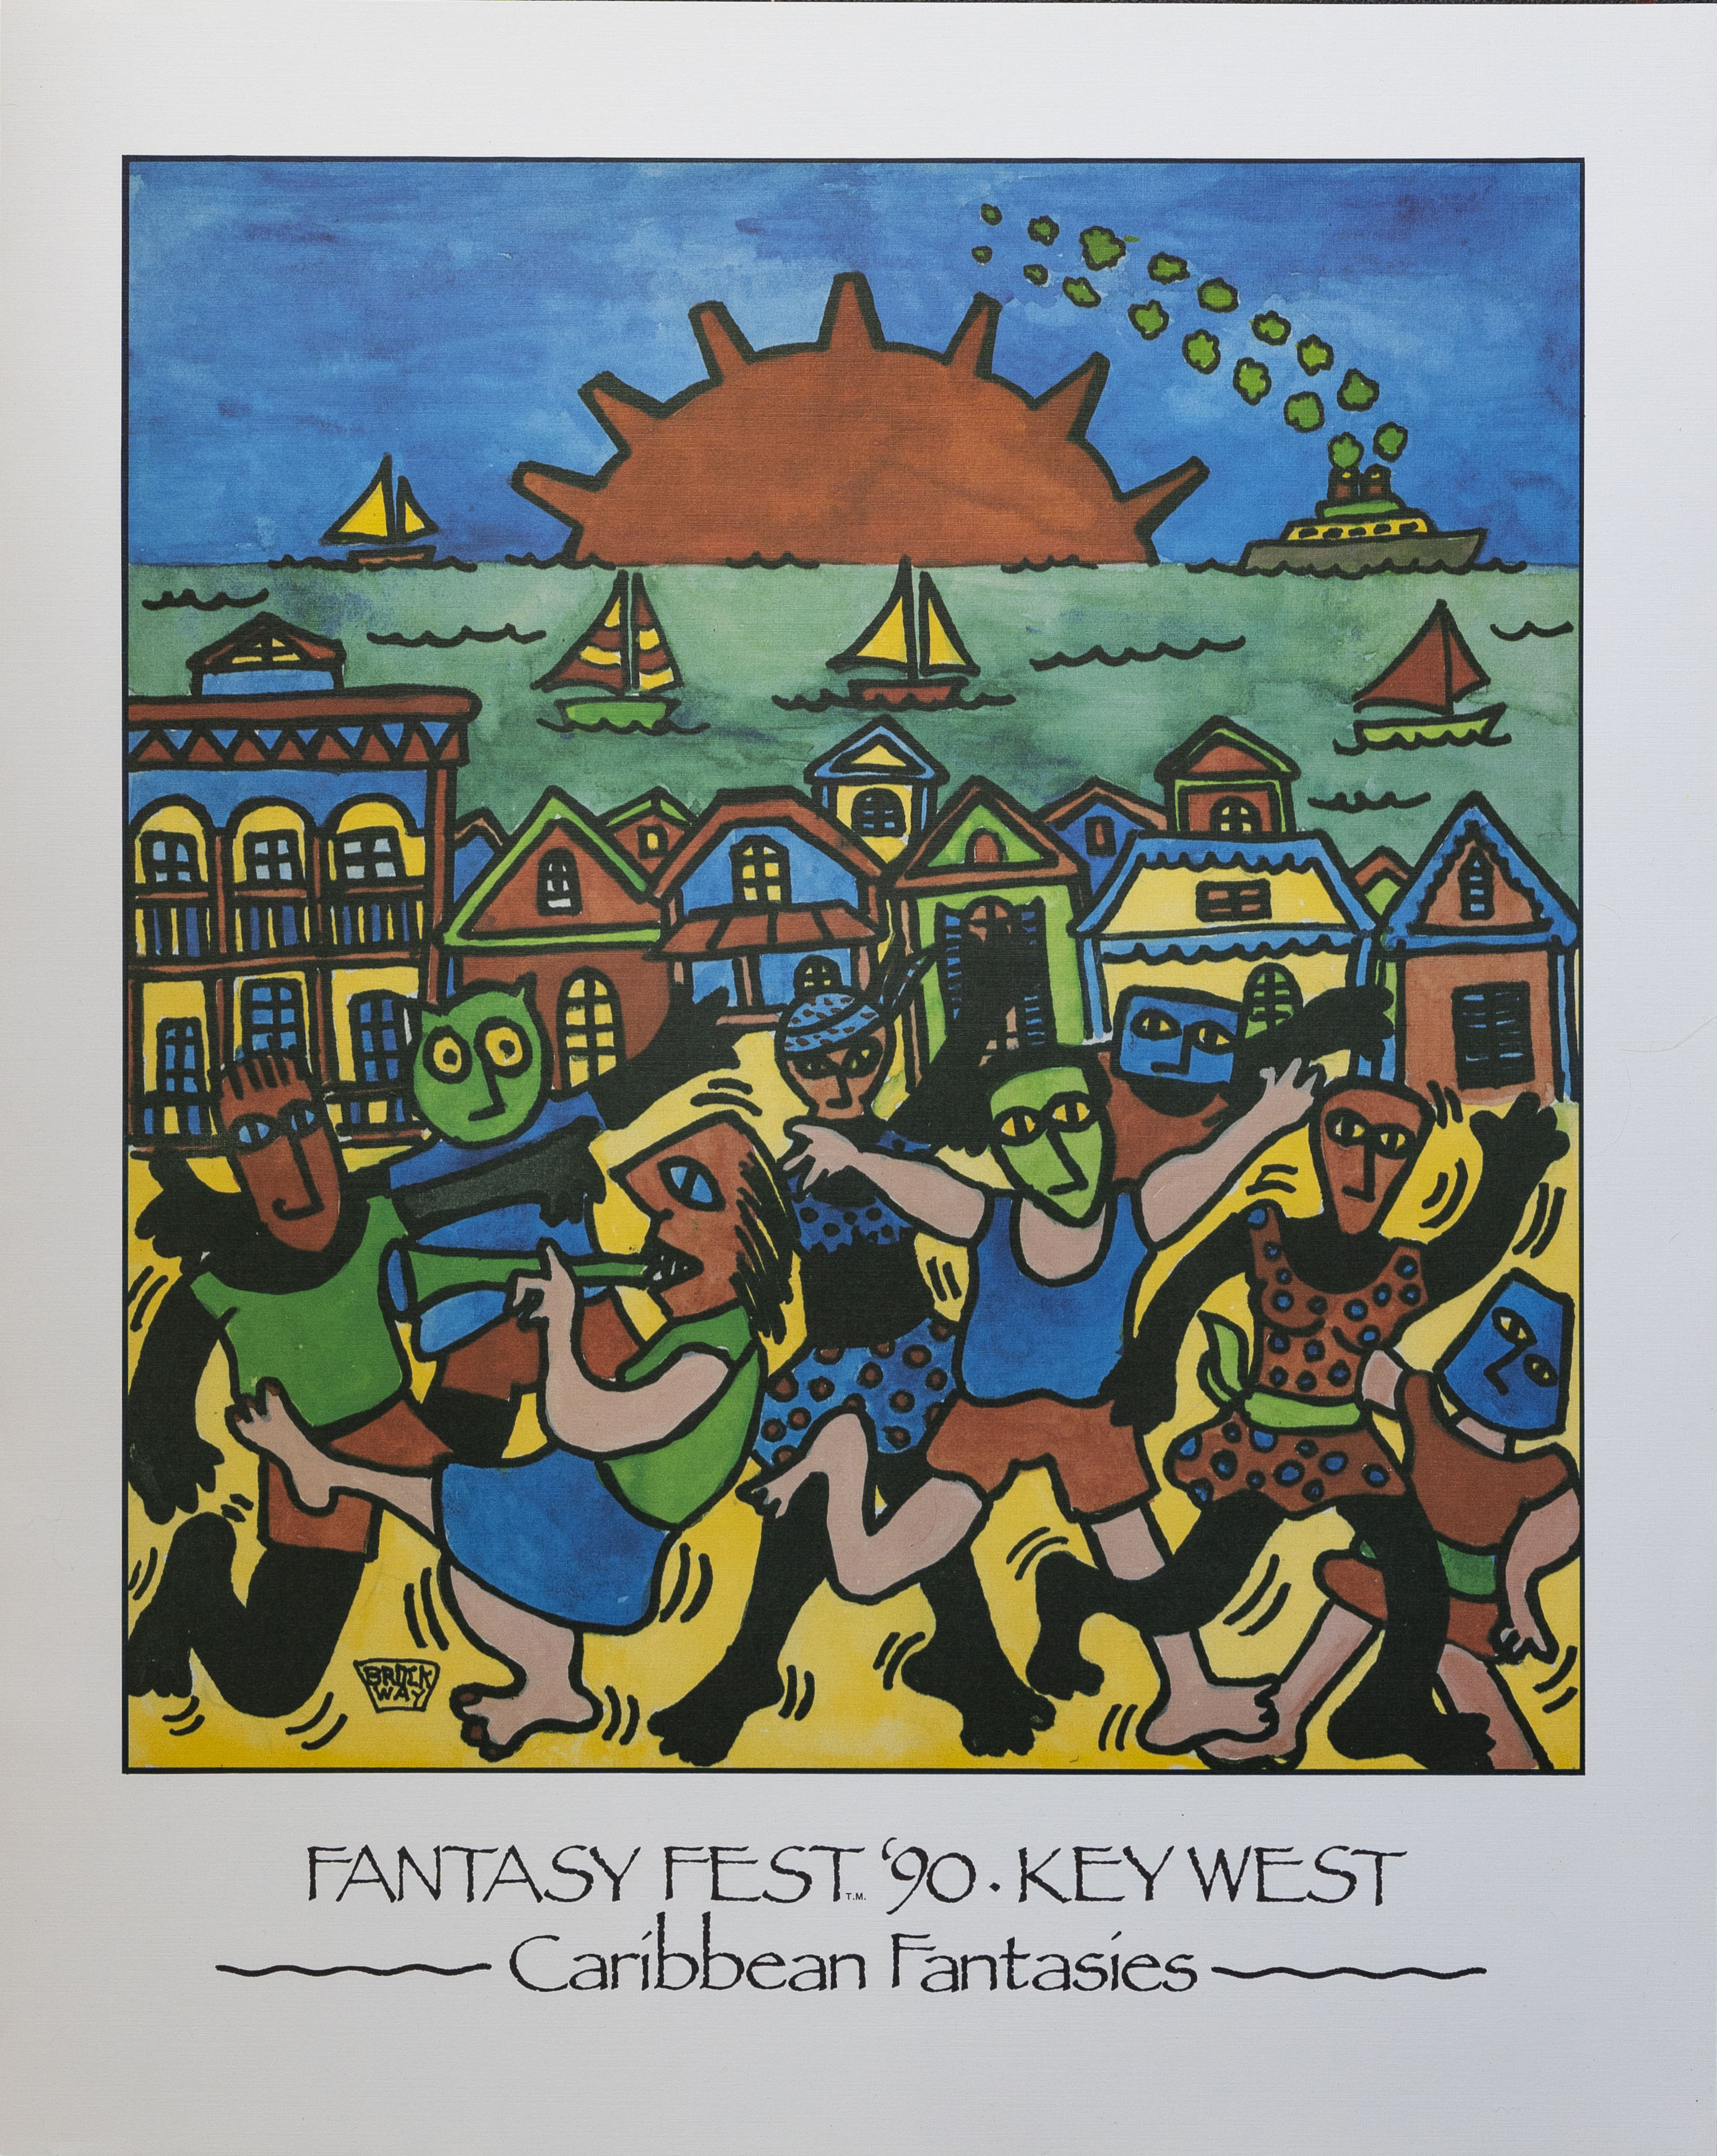 Official 1990 Fantasy Fest Poster Caribbean Fantasies by Brock Way